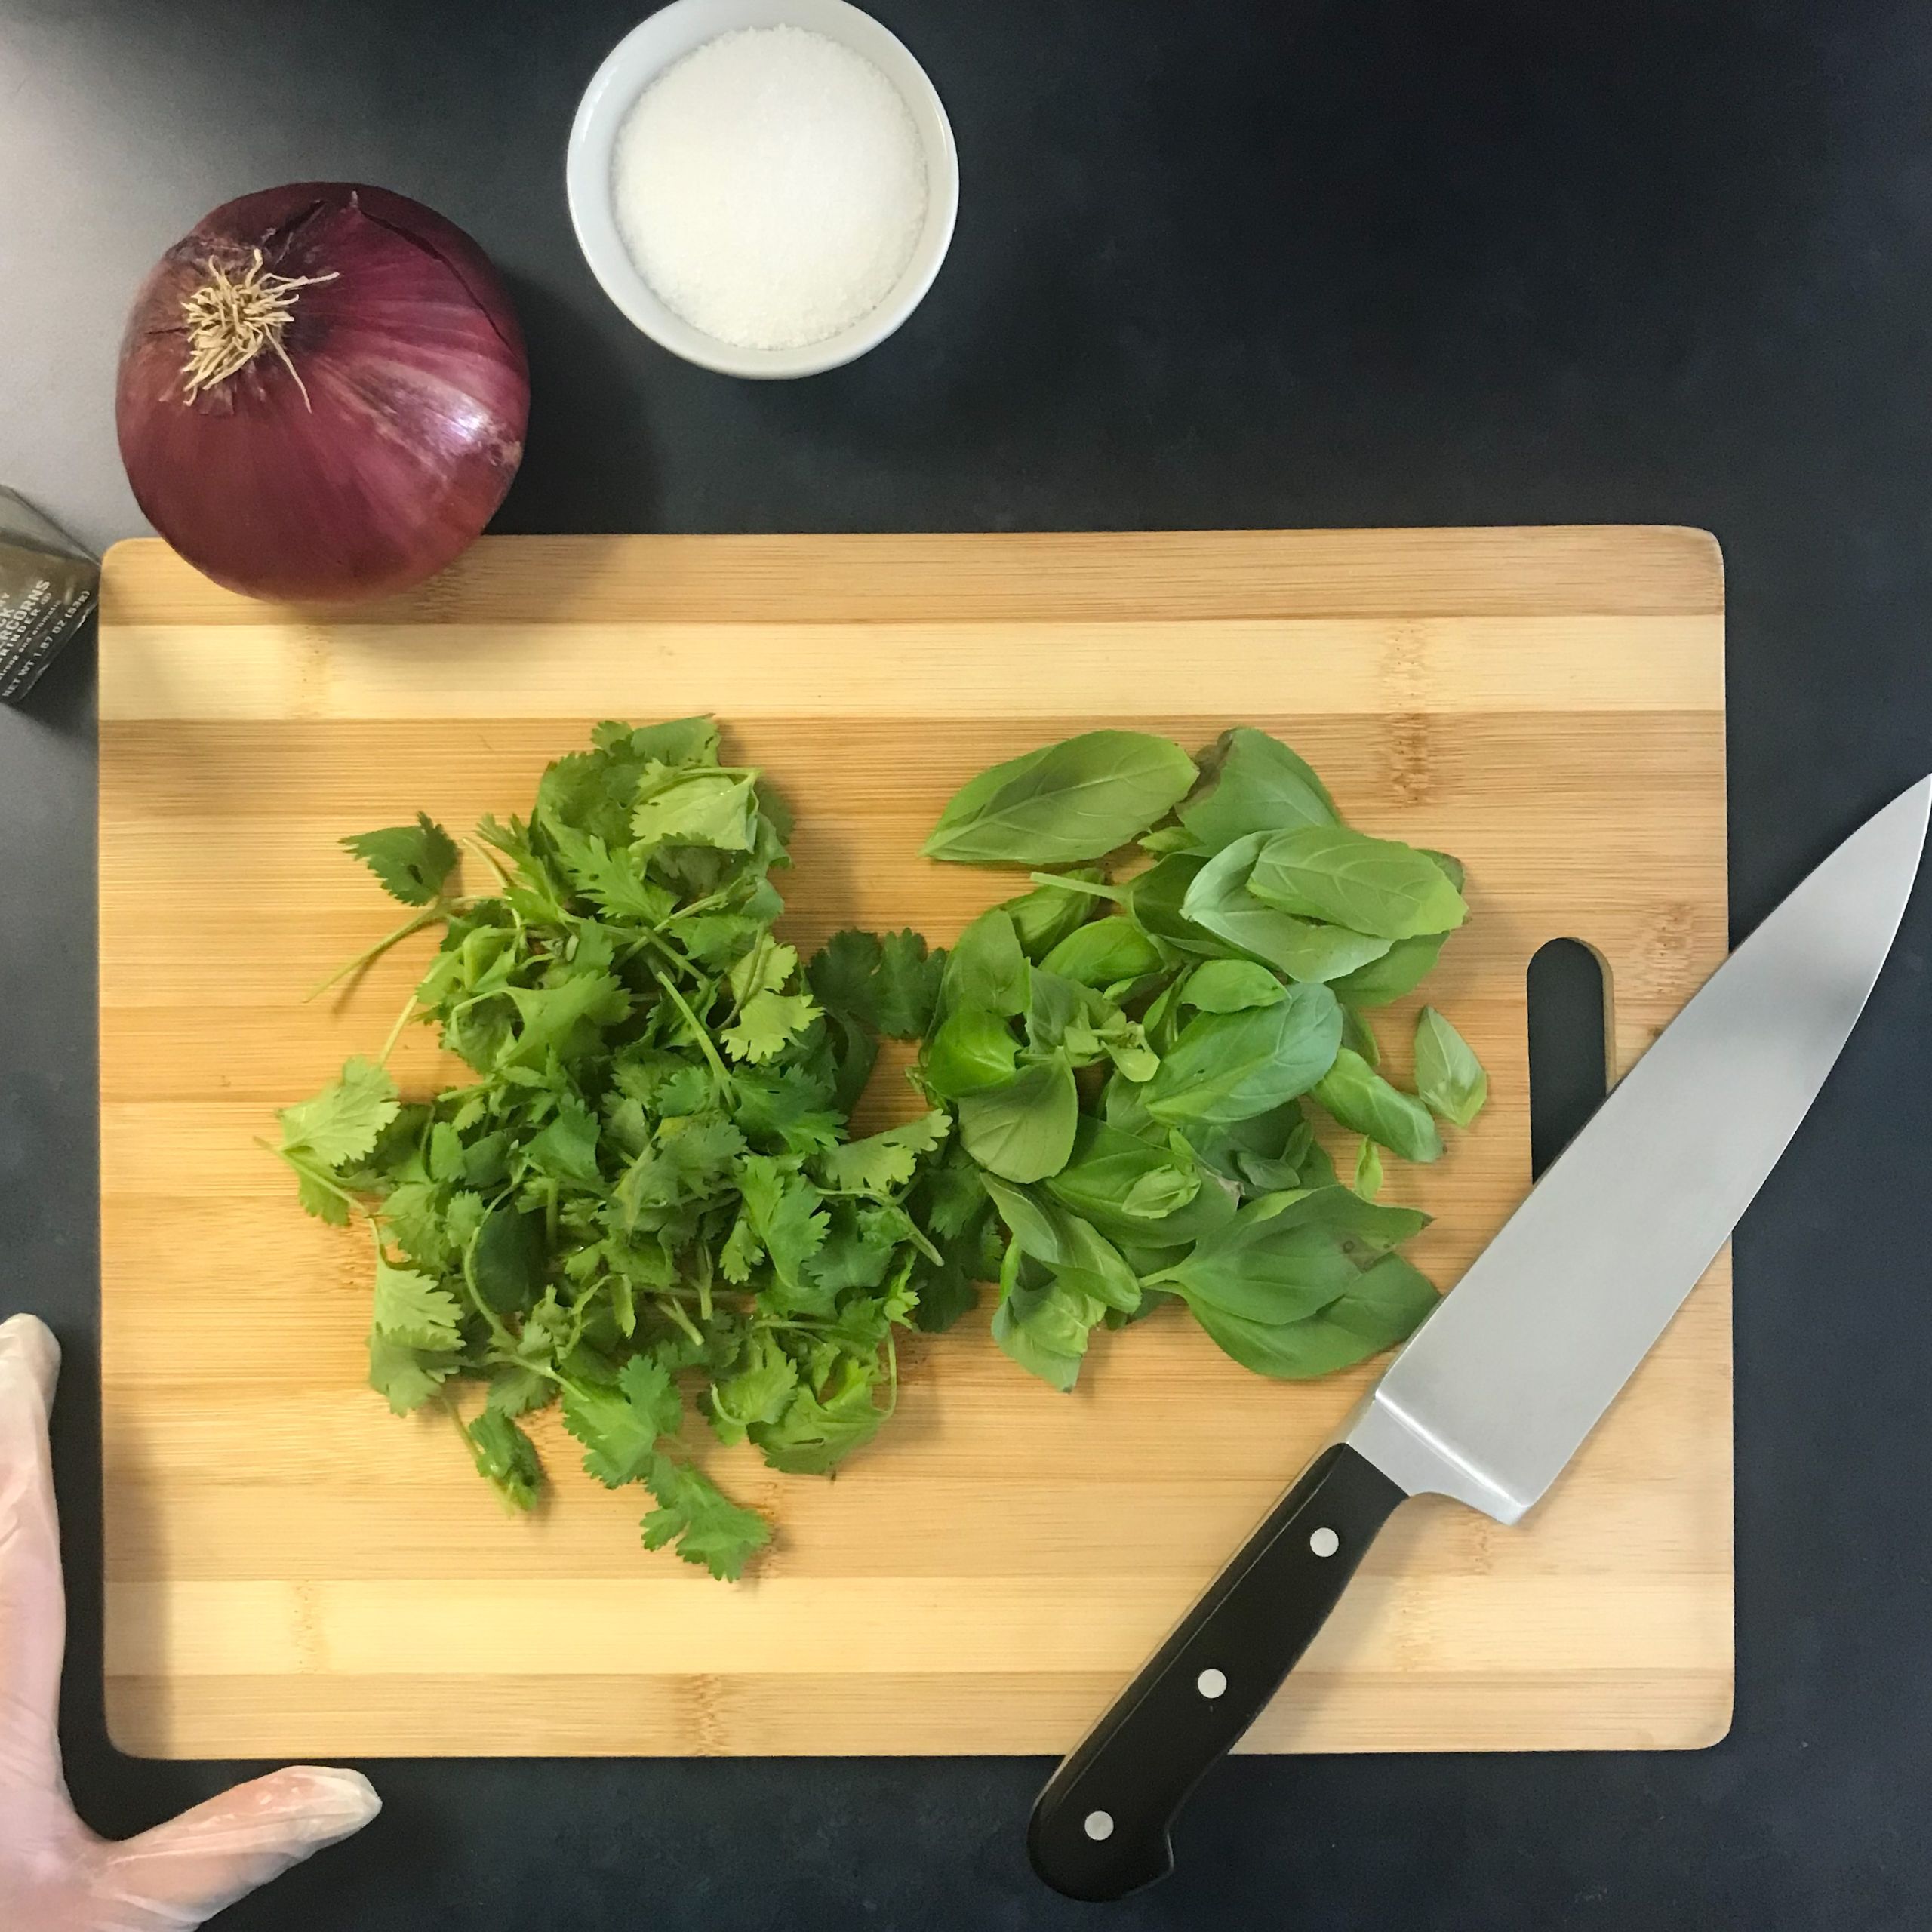 parsley and basil on chopping board | My Curated Tastes